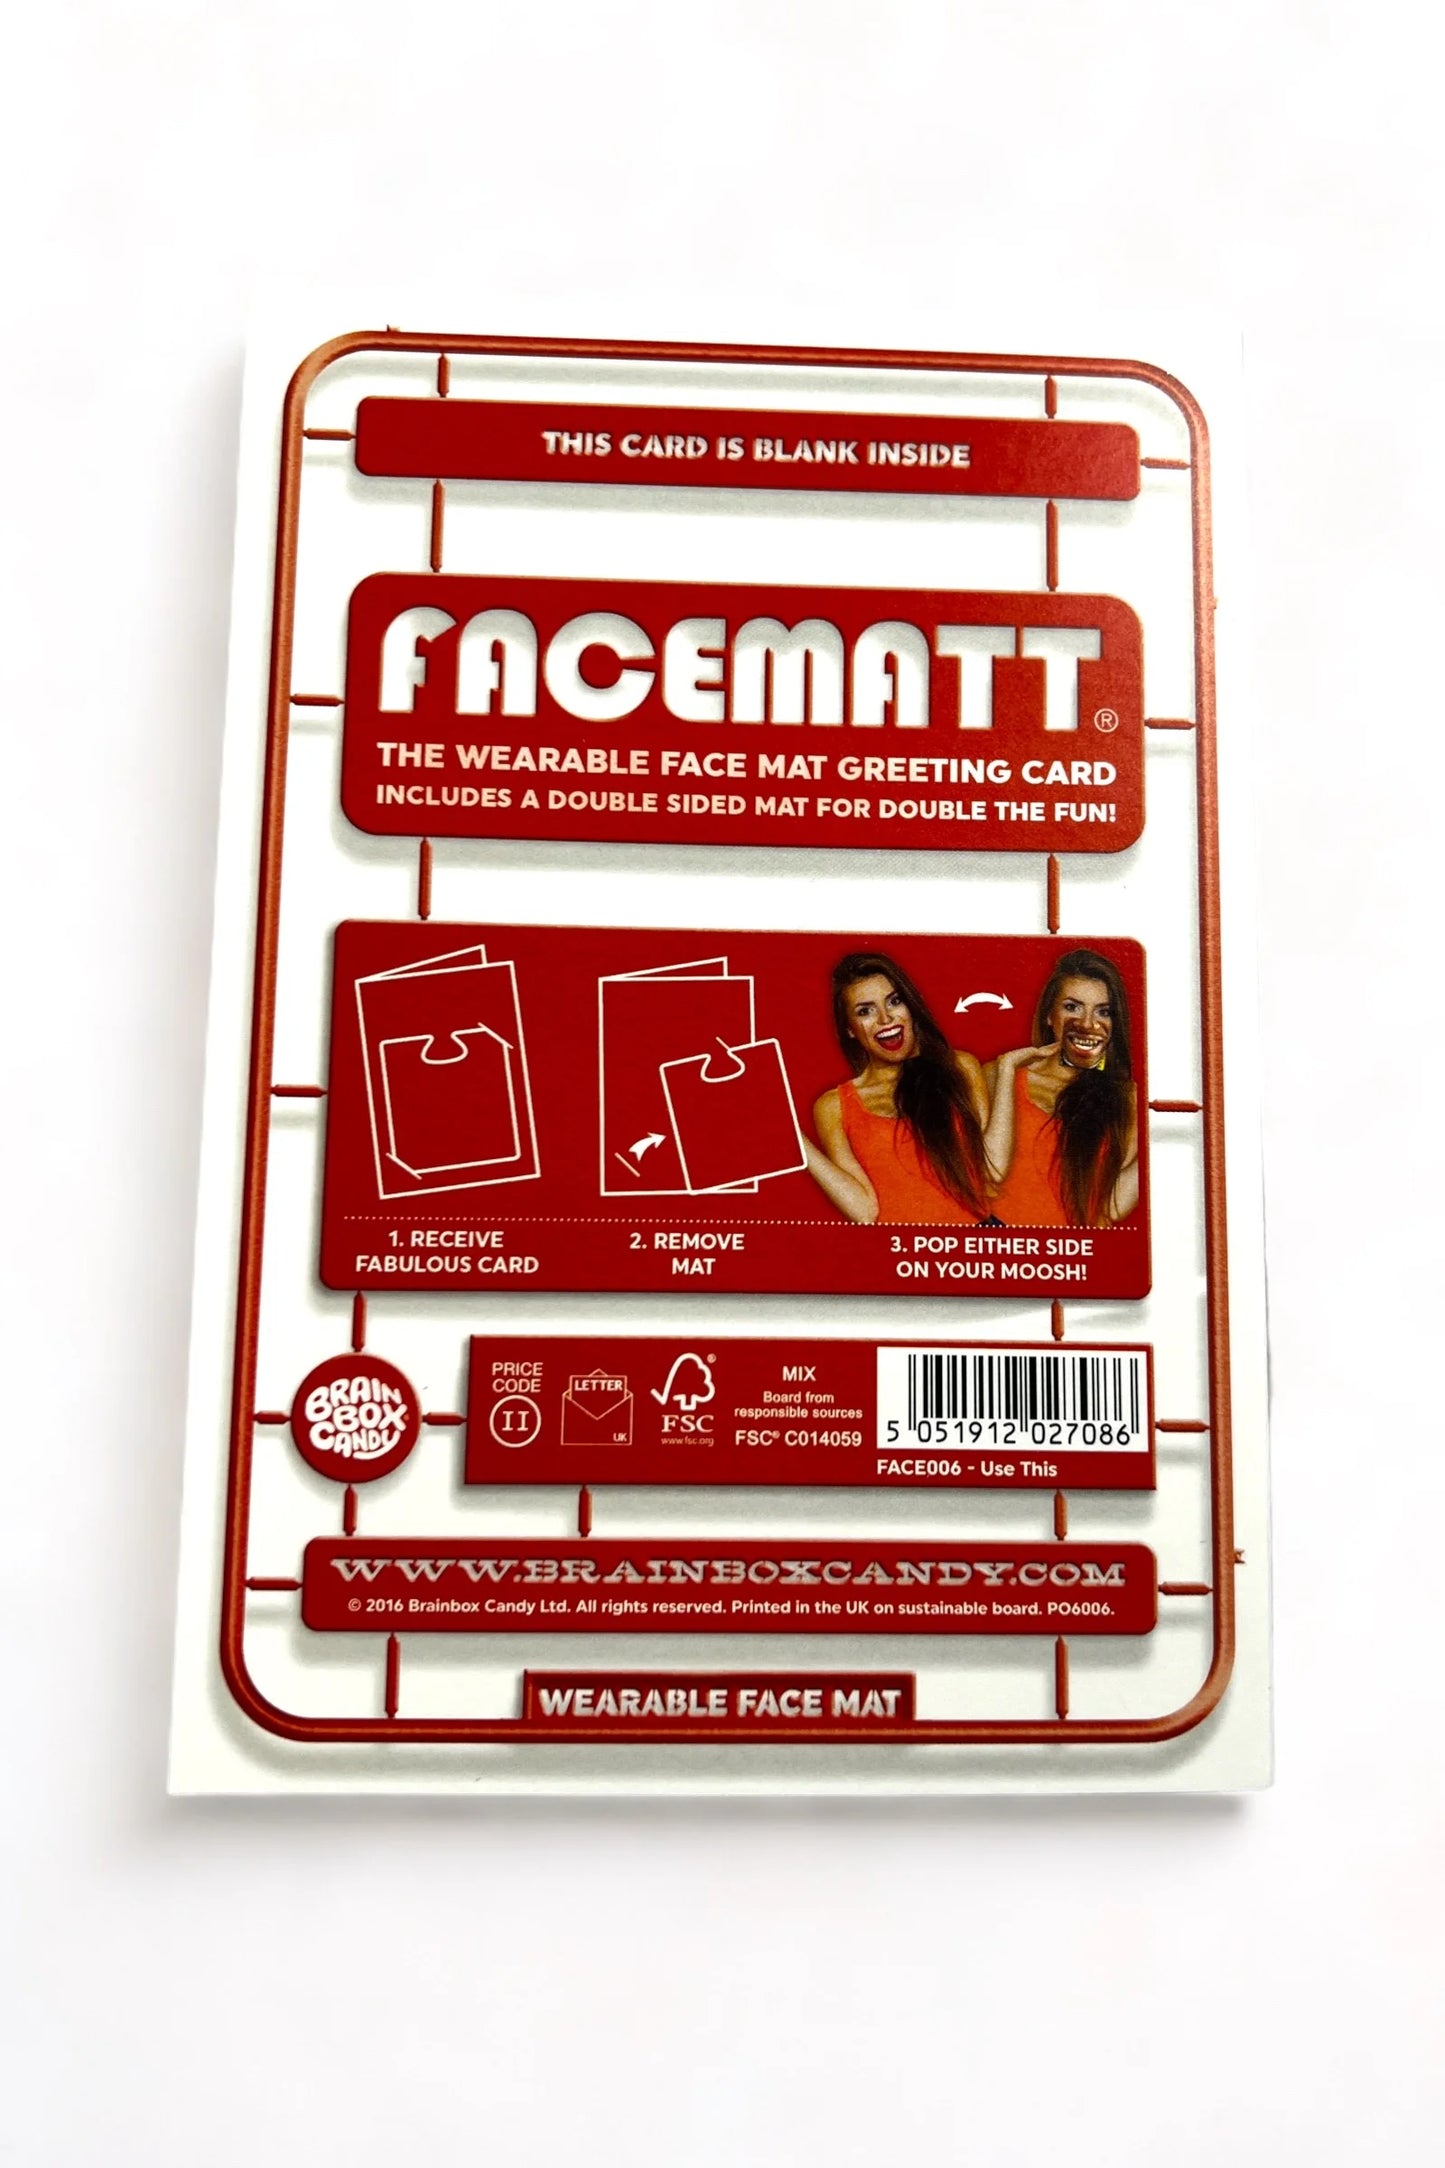 The Wearable Facemat Greeting Card